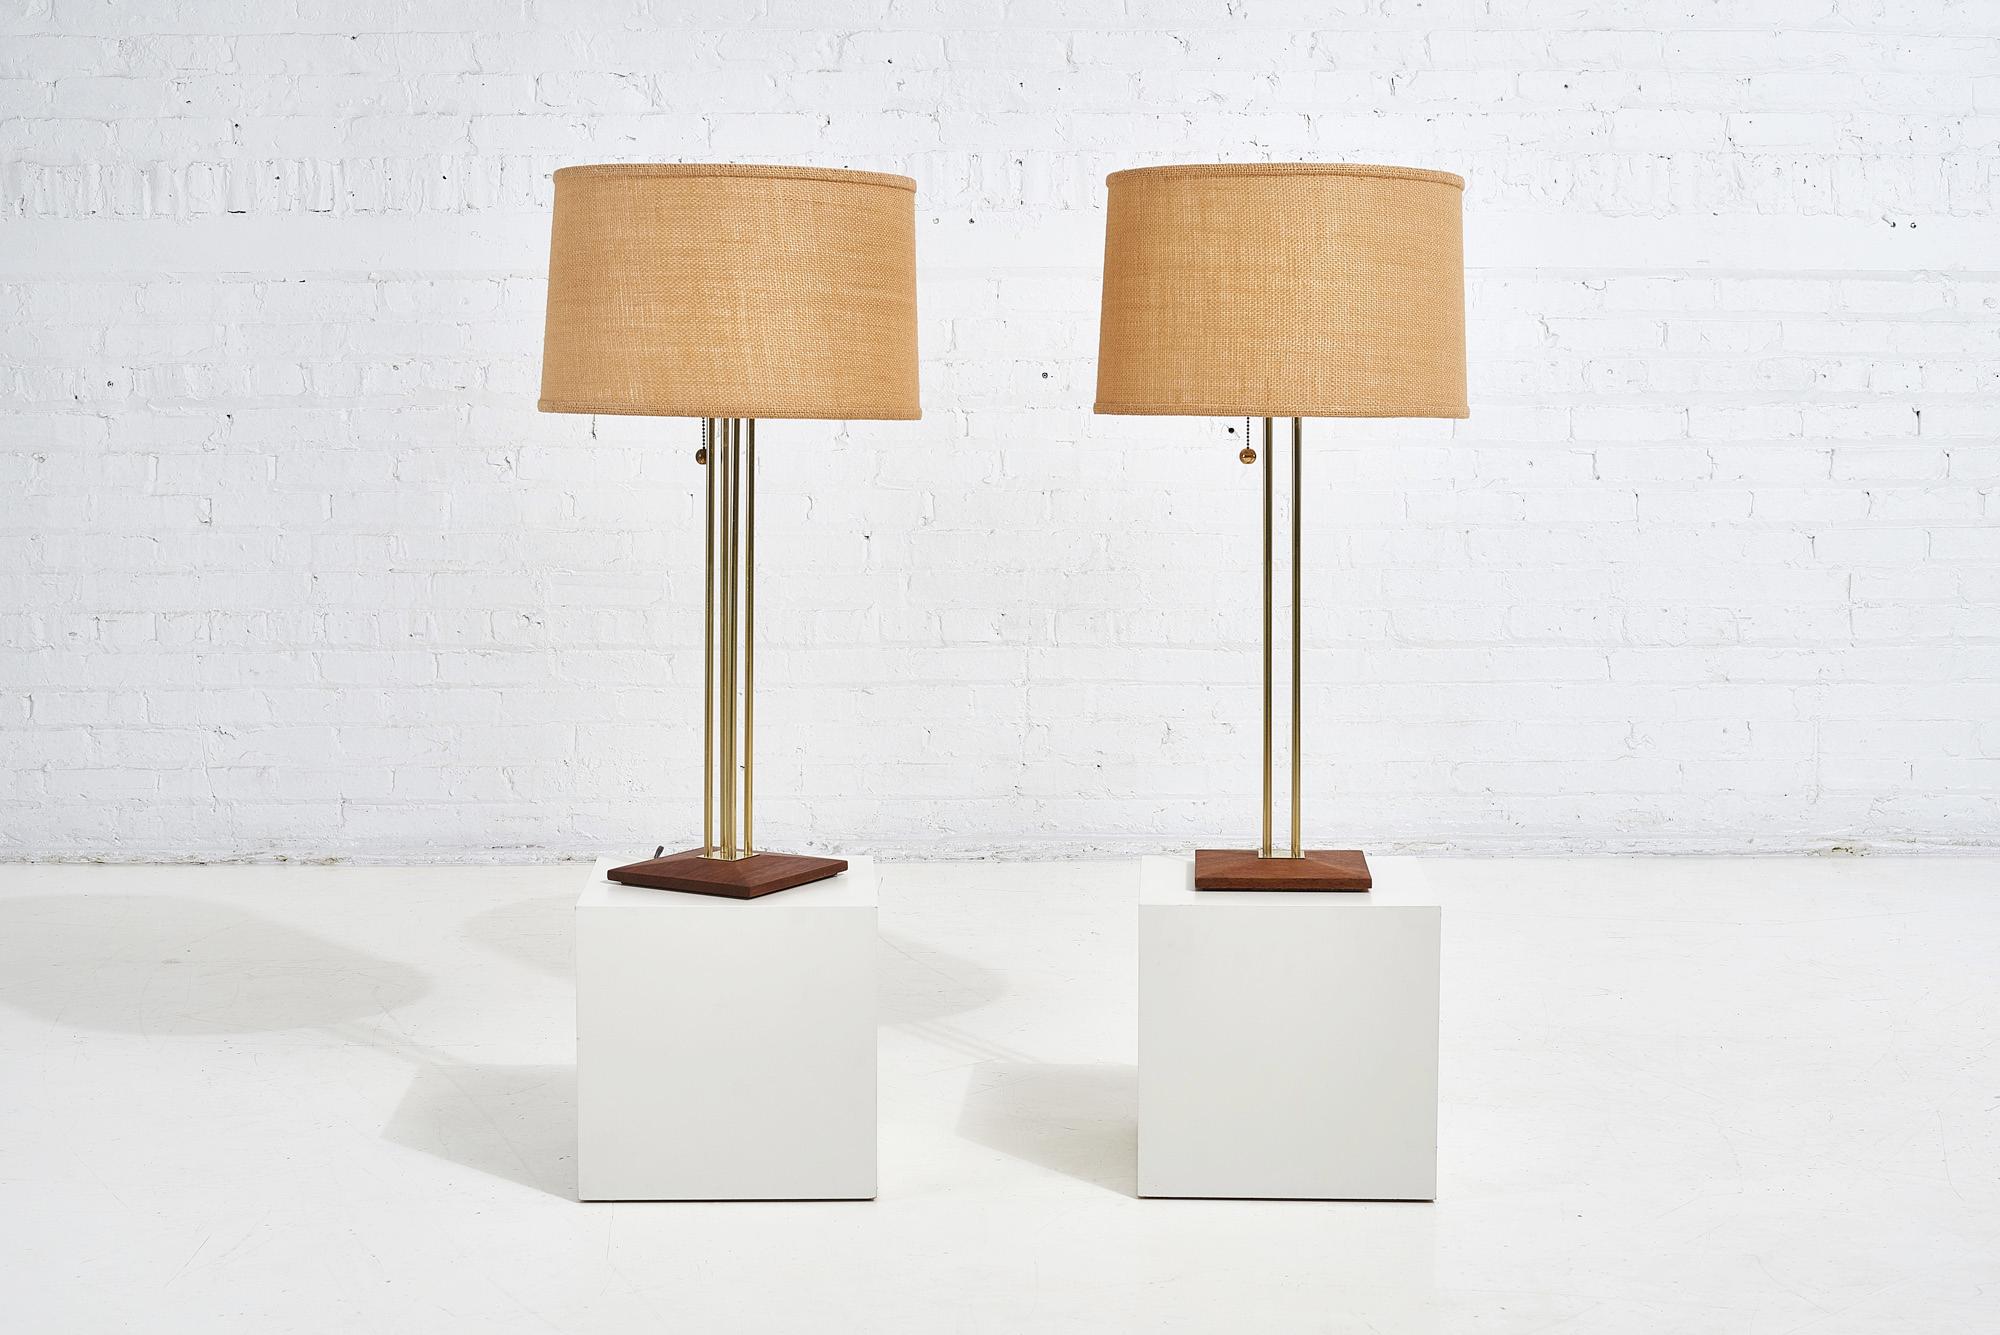 Pair of Gerald Thurston for Lightolier table lamps, 1950. Brass and walnut lamps by Gerald
Thurston. Shades are original and lamps are fully restored and refinished.